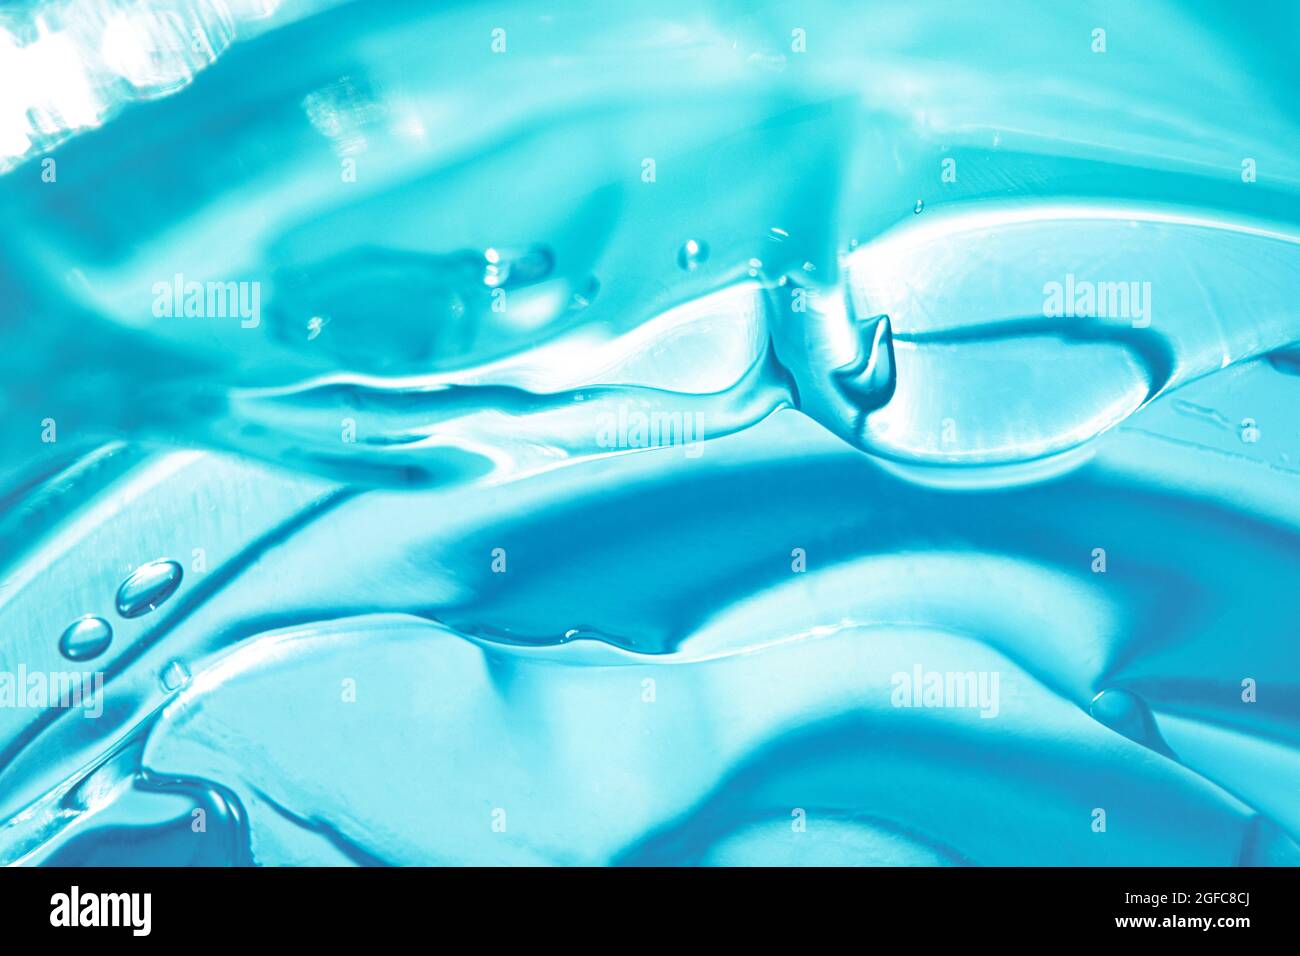 Blue Liquid cosmetic water gel smudged texture Stock Photo - Alamy